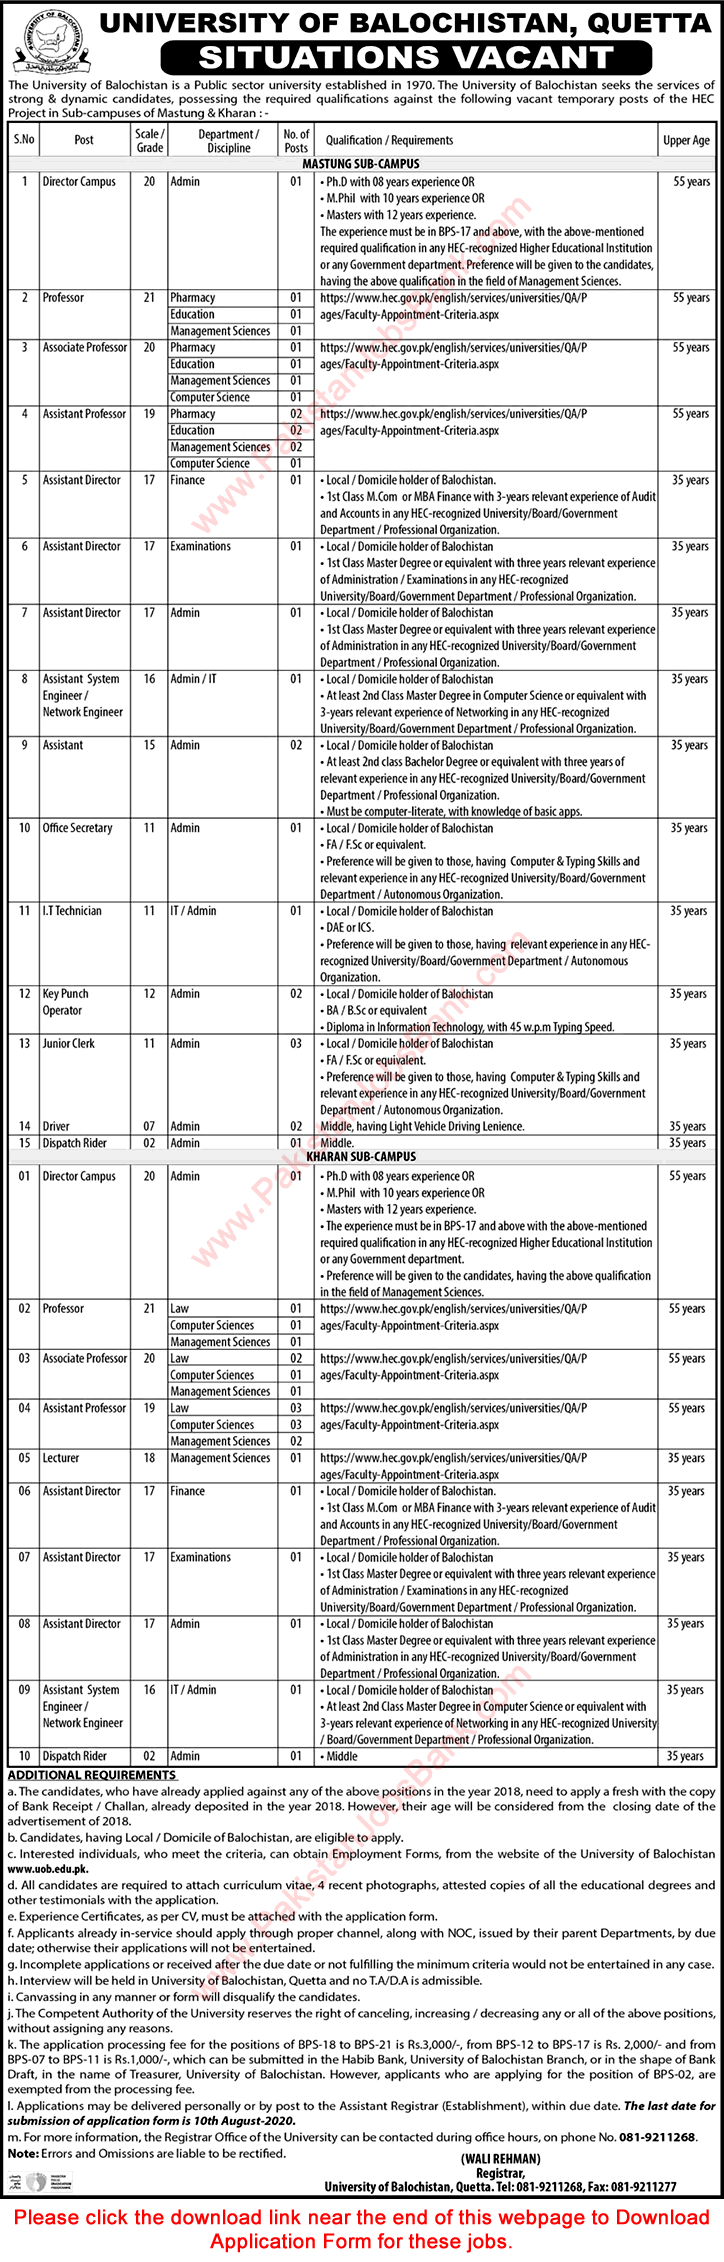 University of Balochistan Jobs 2020 July Application Form Teaching Faculty & Others Latest